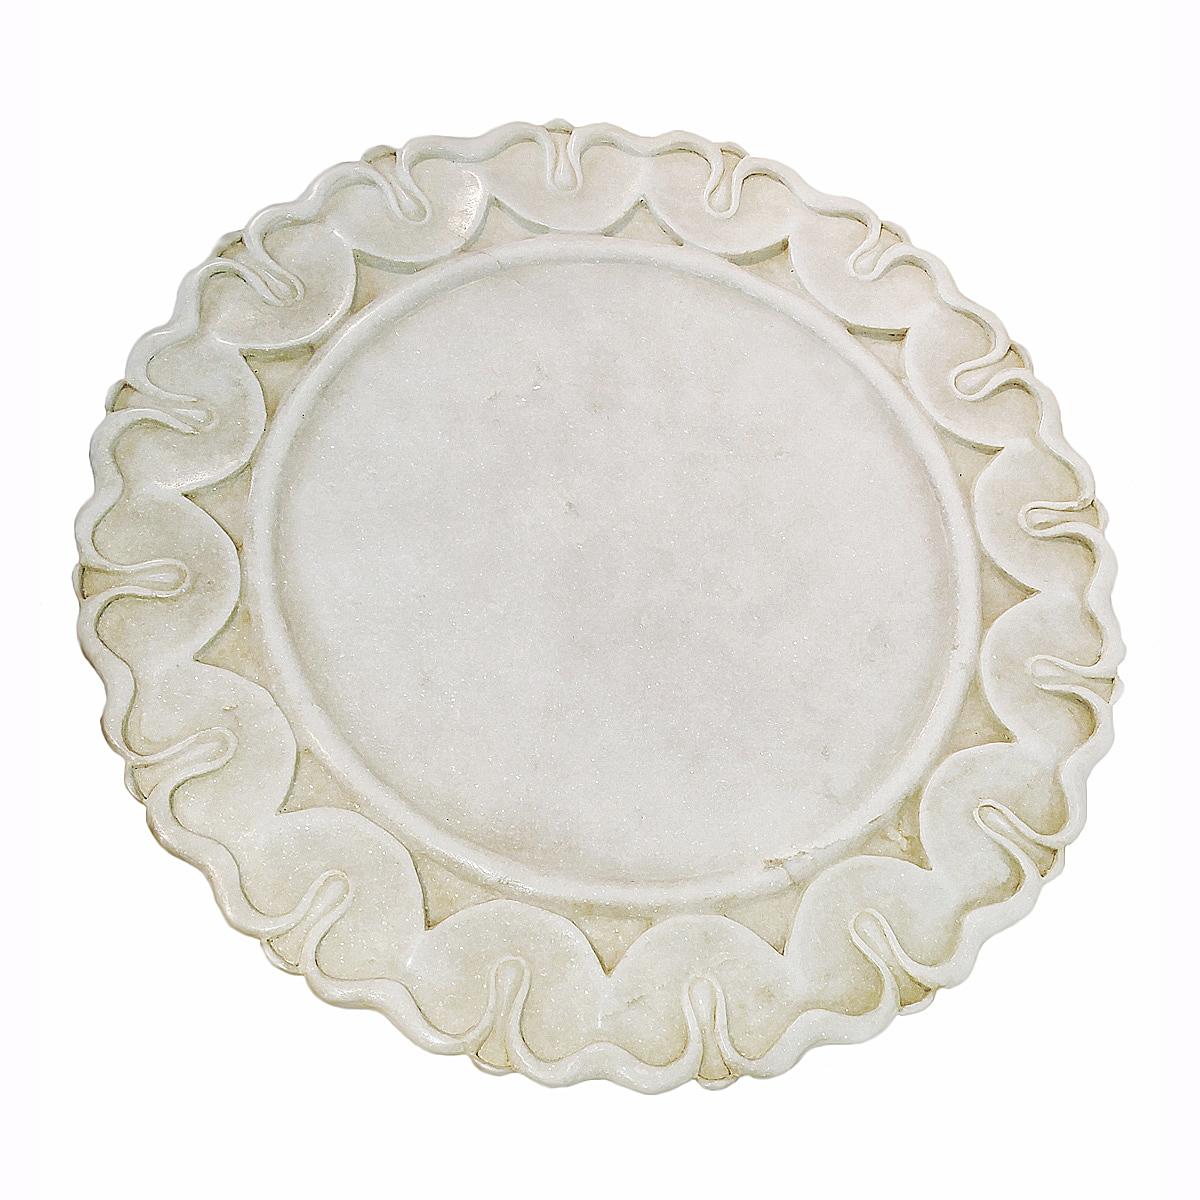 A hand-carved marble platter, server or charger from India. 24 inches diameter.